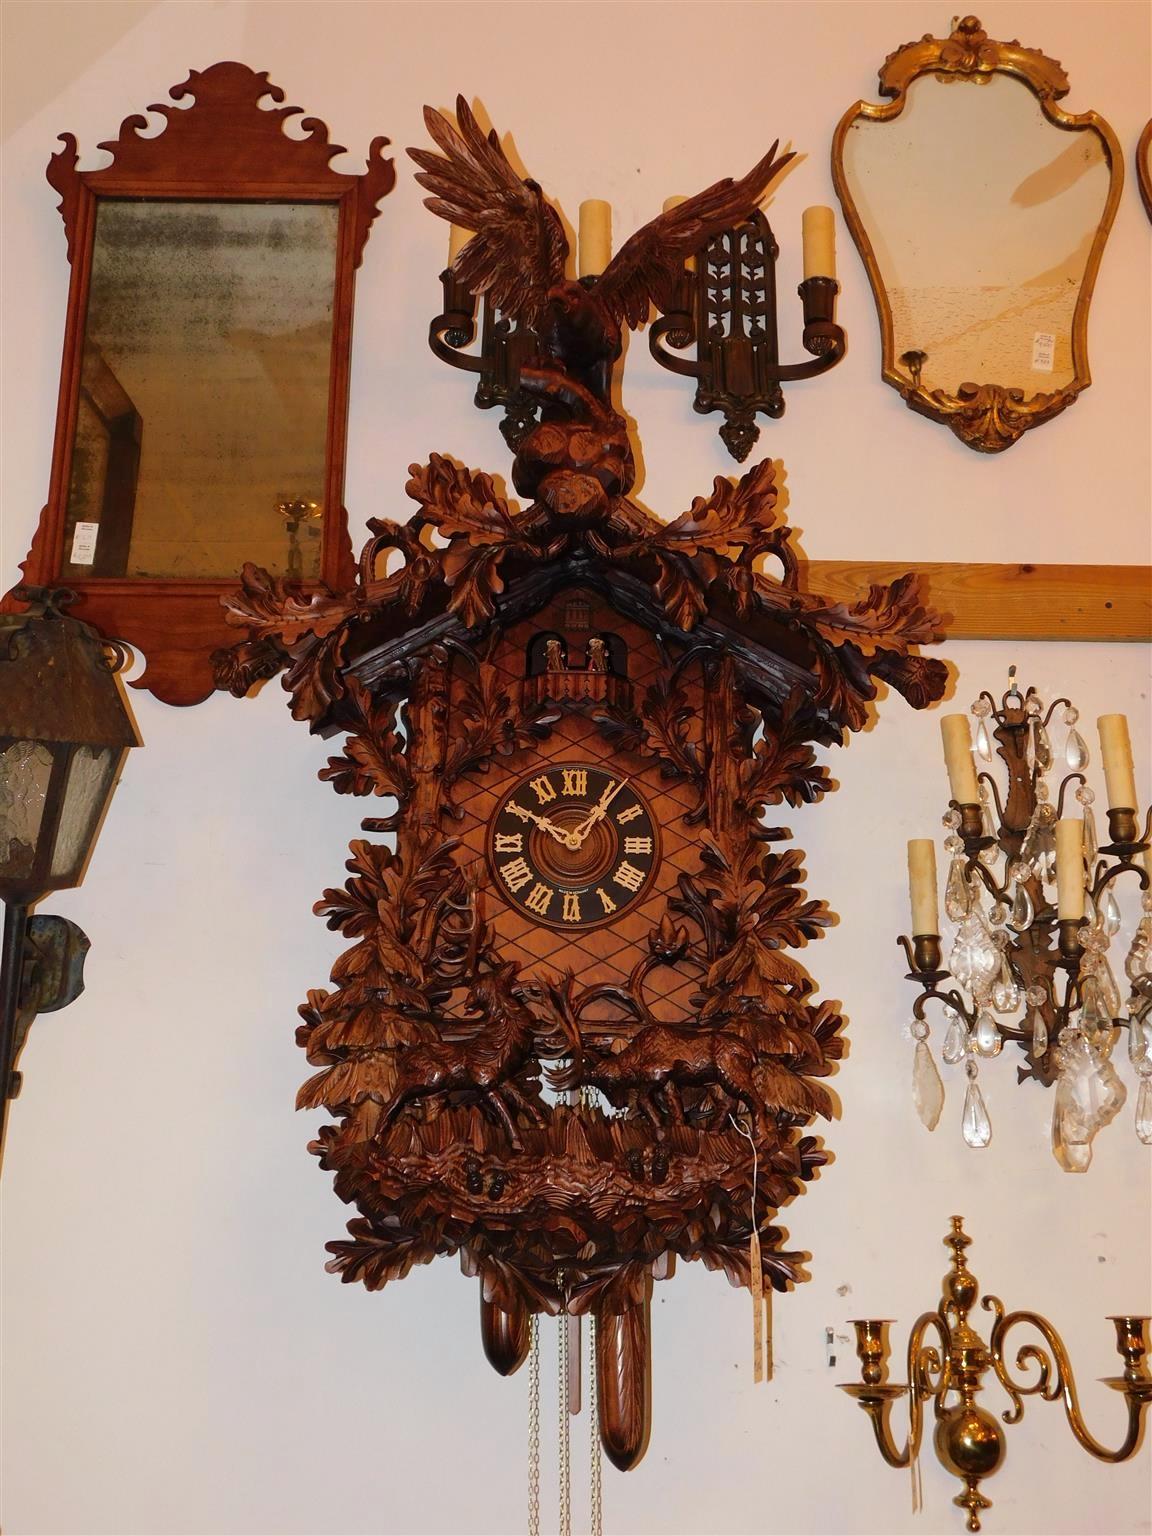 The Linden wood case of grand proportions has a carved realistic perched spread winged eagle with fighting stags within a wooded landscape all amongst a branched garland of oak leaves. The weight-driven movement activating the timekeeping and the